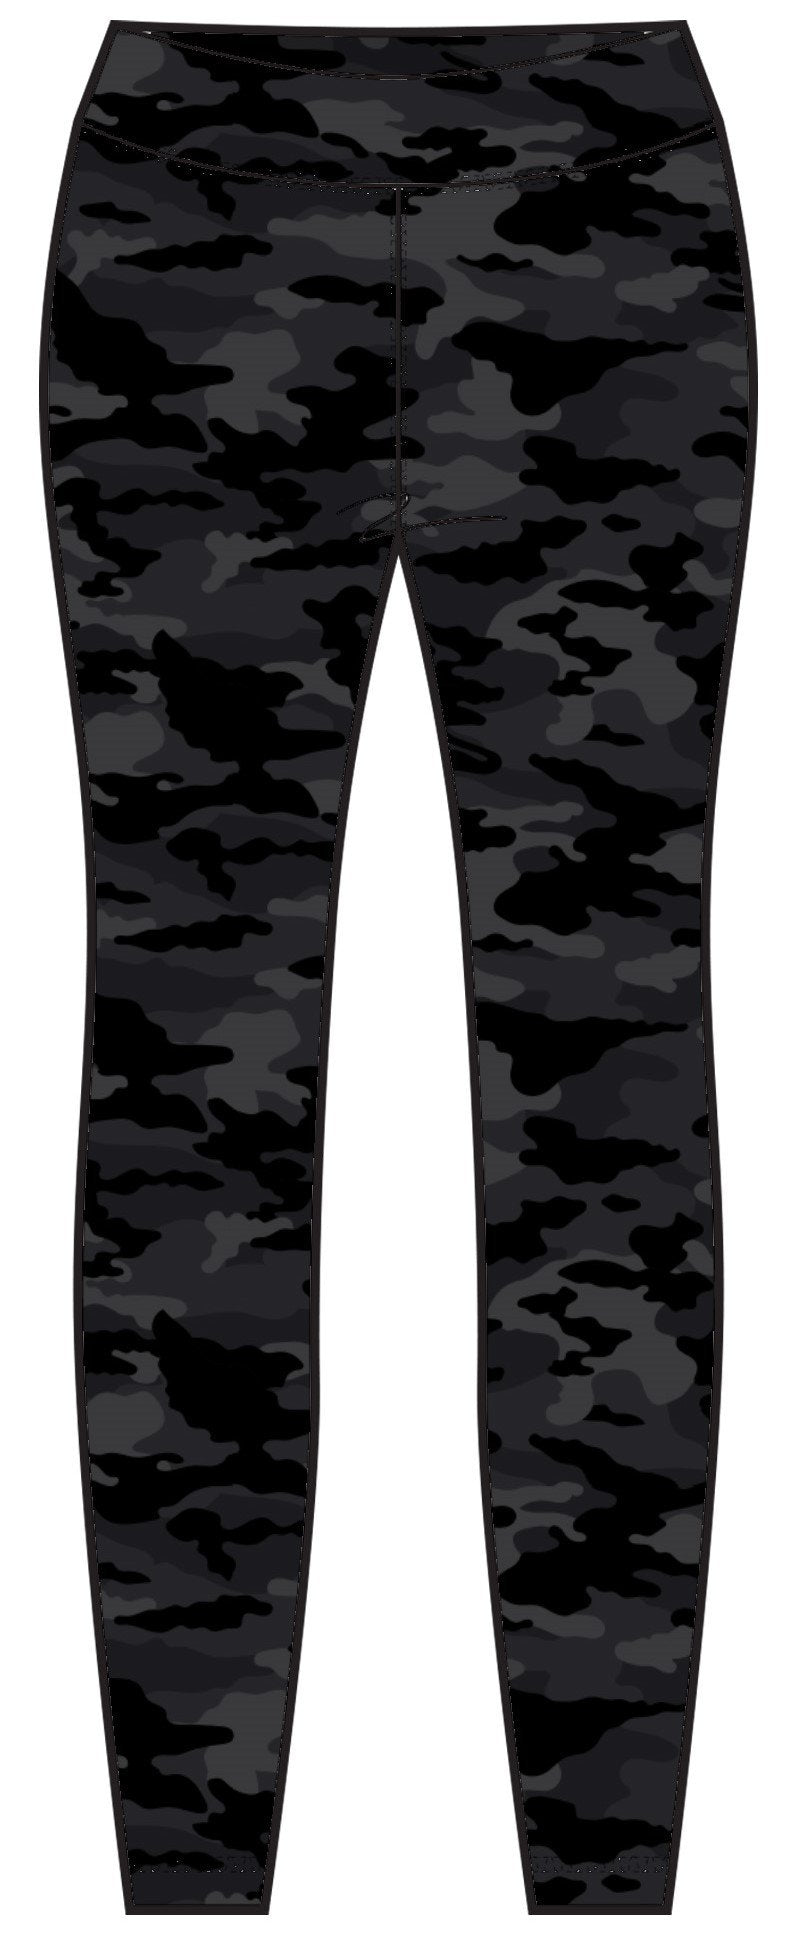 Black Camo Leggings for Women Womens Black Leggings With Camouflage Print  Non See Through Squat Approved Perfect for Yoga, Gym, Running - Etsy